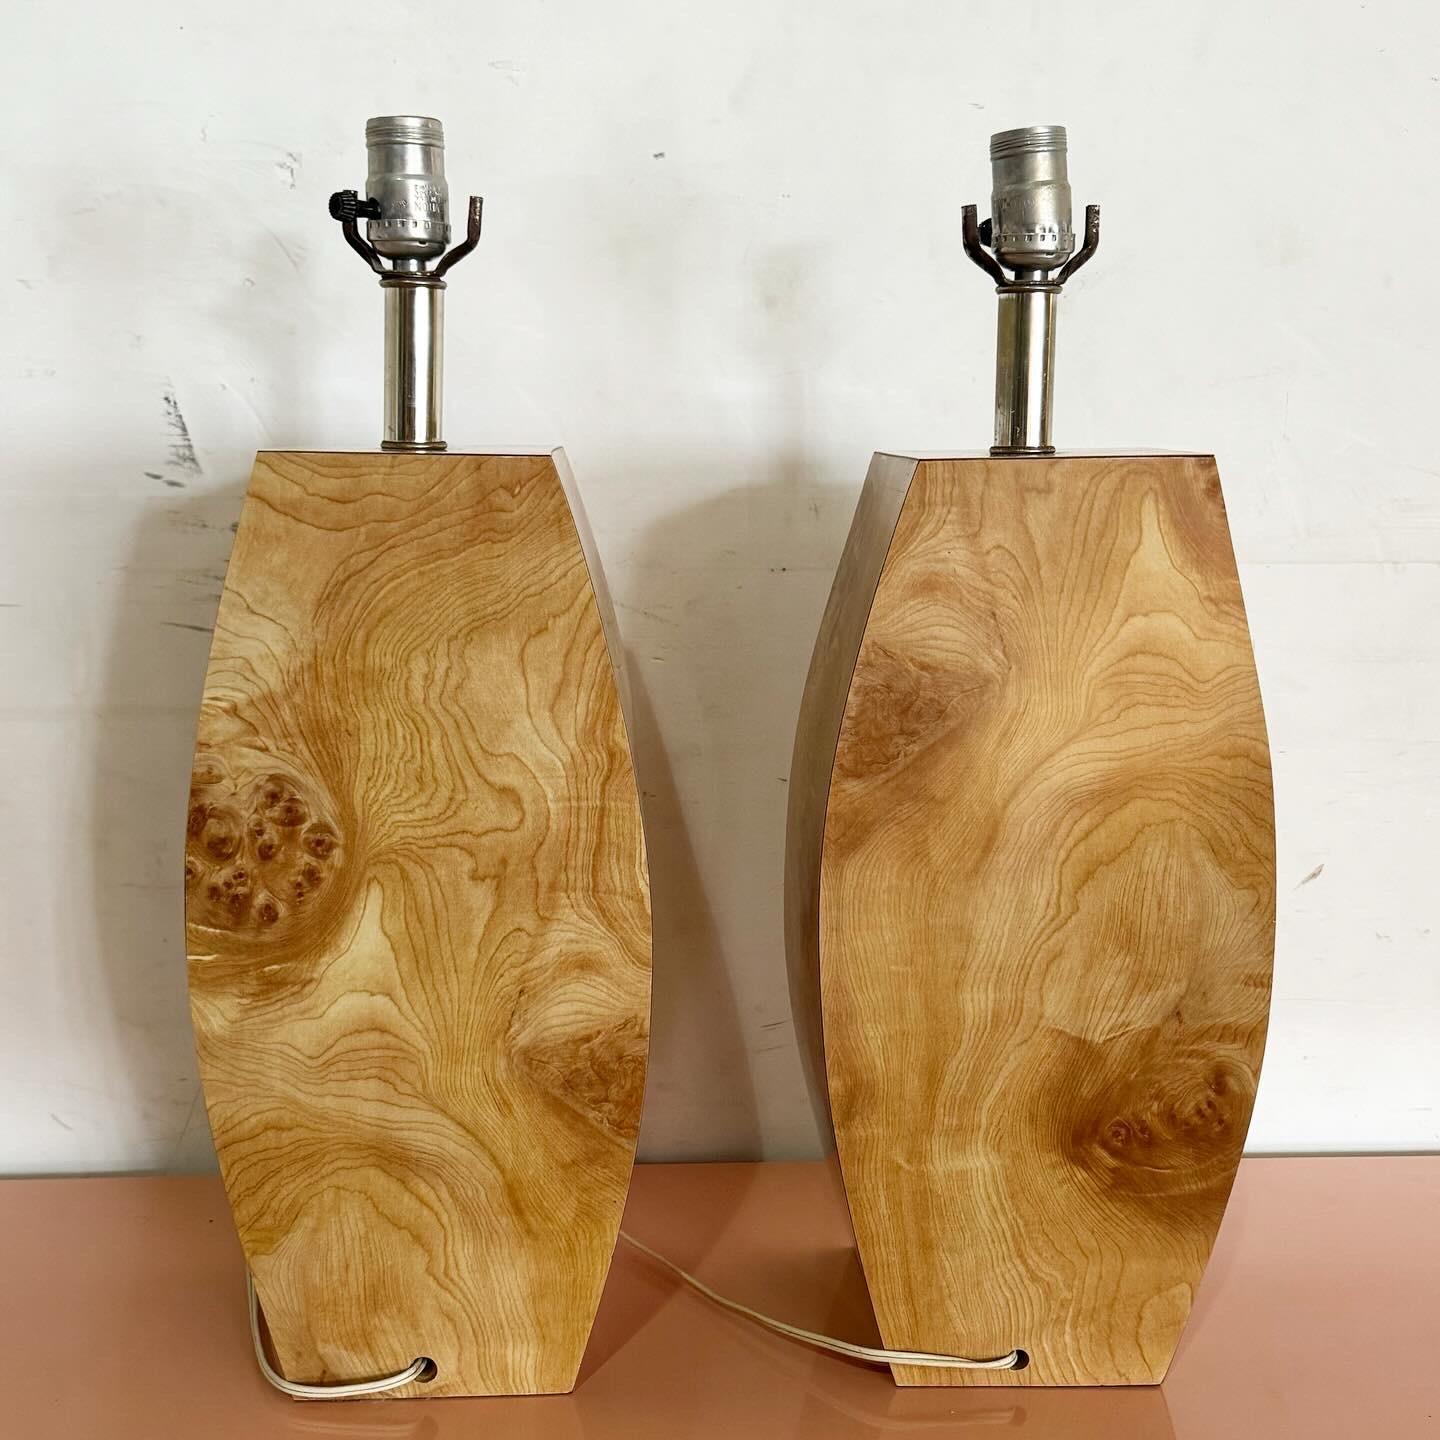 Postmodern Burl Wood Laminate Table Lamps - a Pair In Good Condition For Sale In Delray Beach, FL